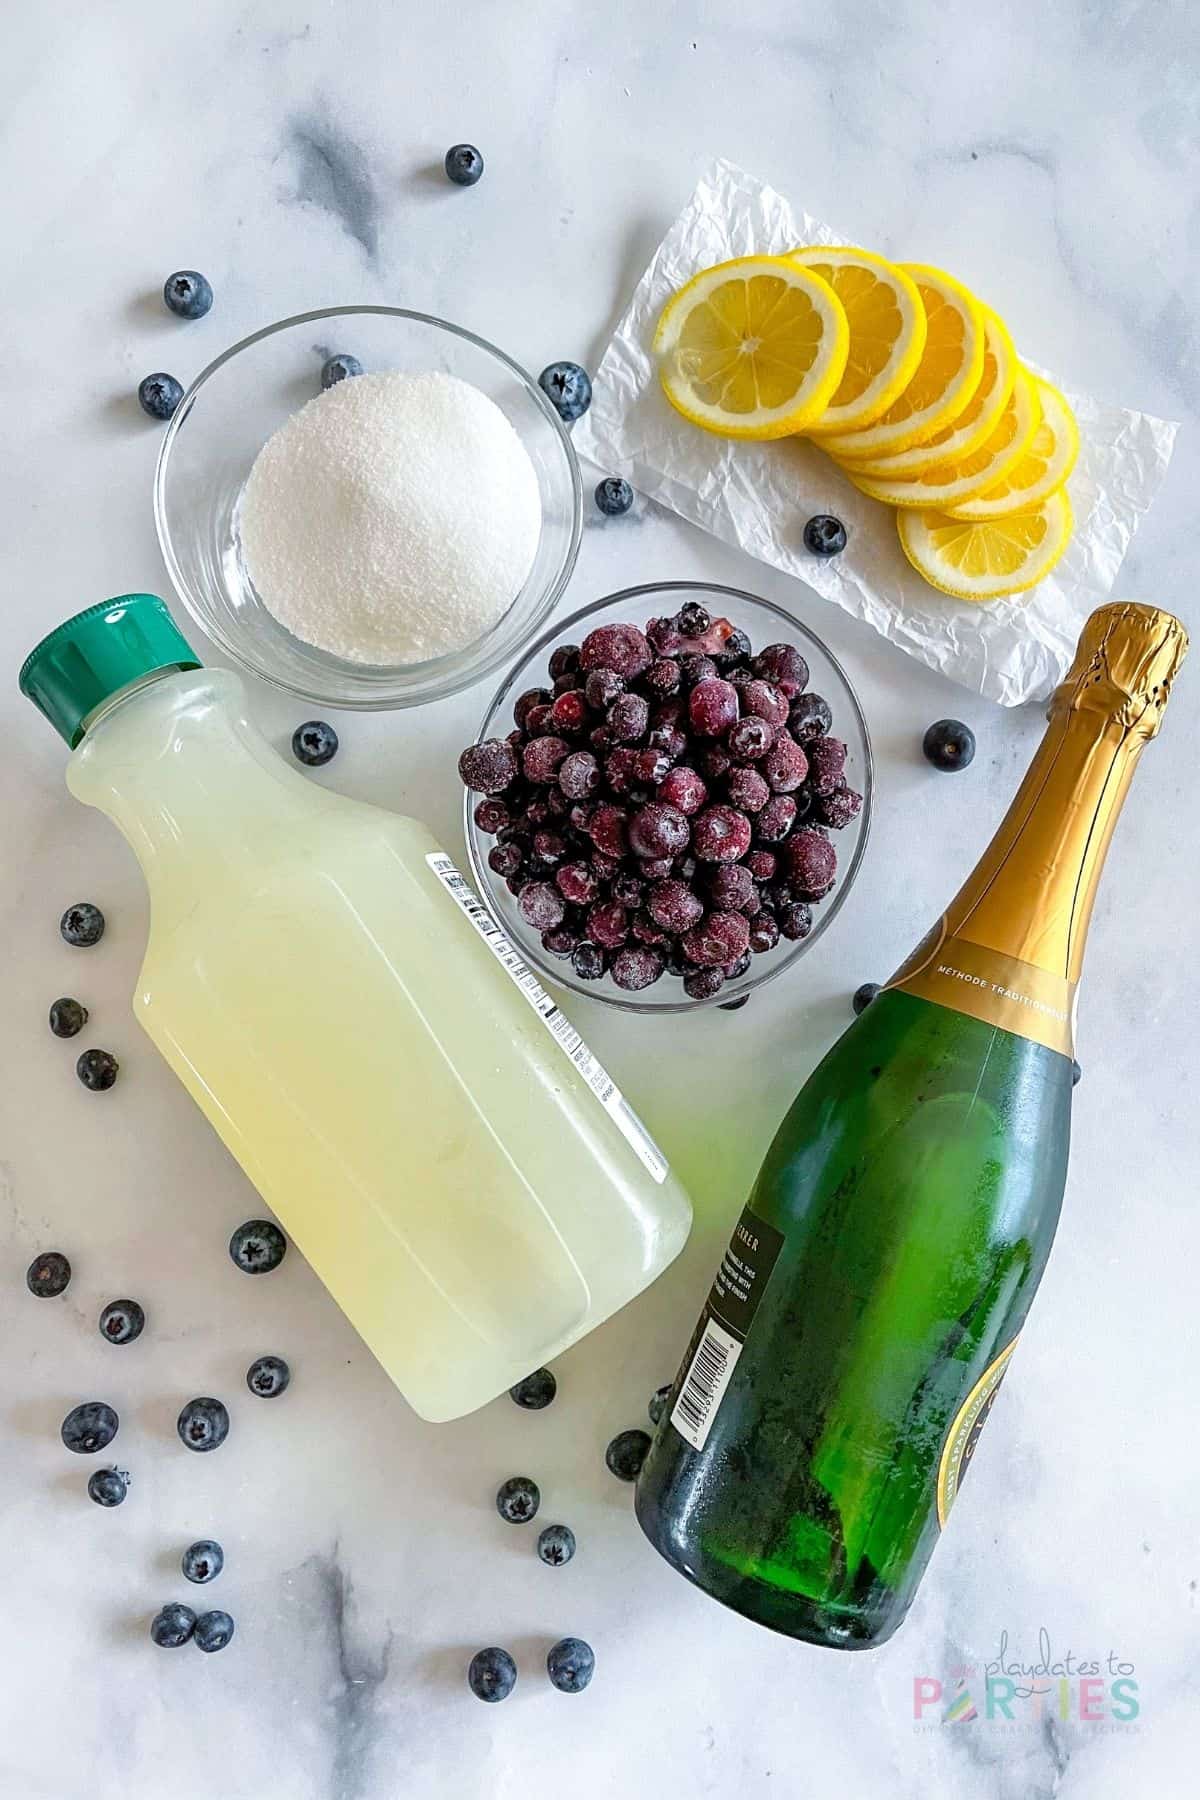 Ingredients for lemon blueberry mimosas: sugar, lemonade, blueberries, and champagne.